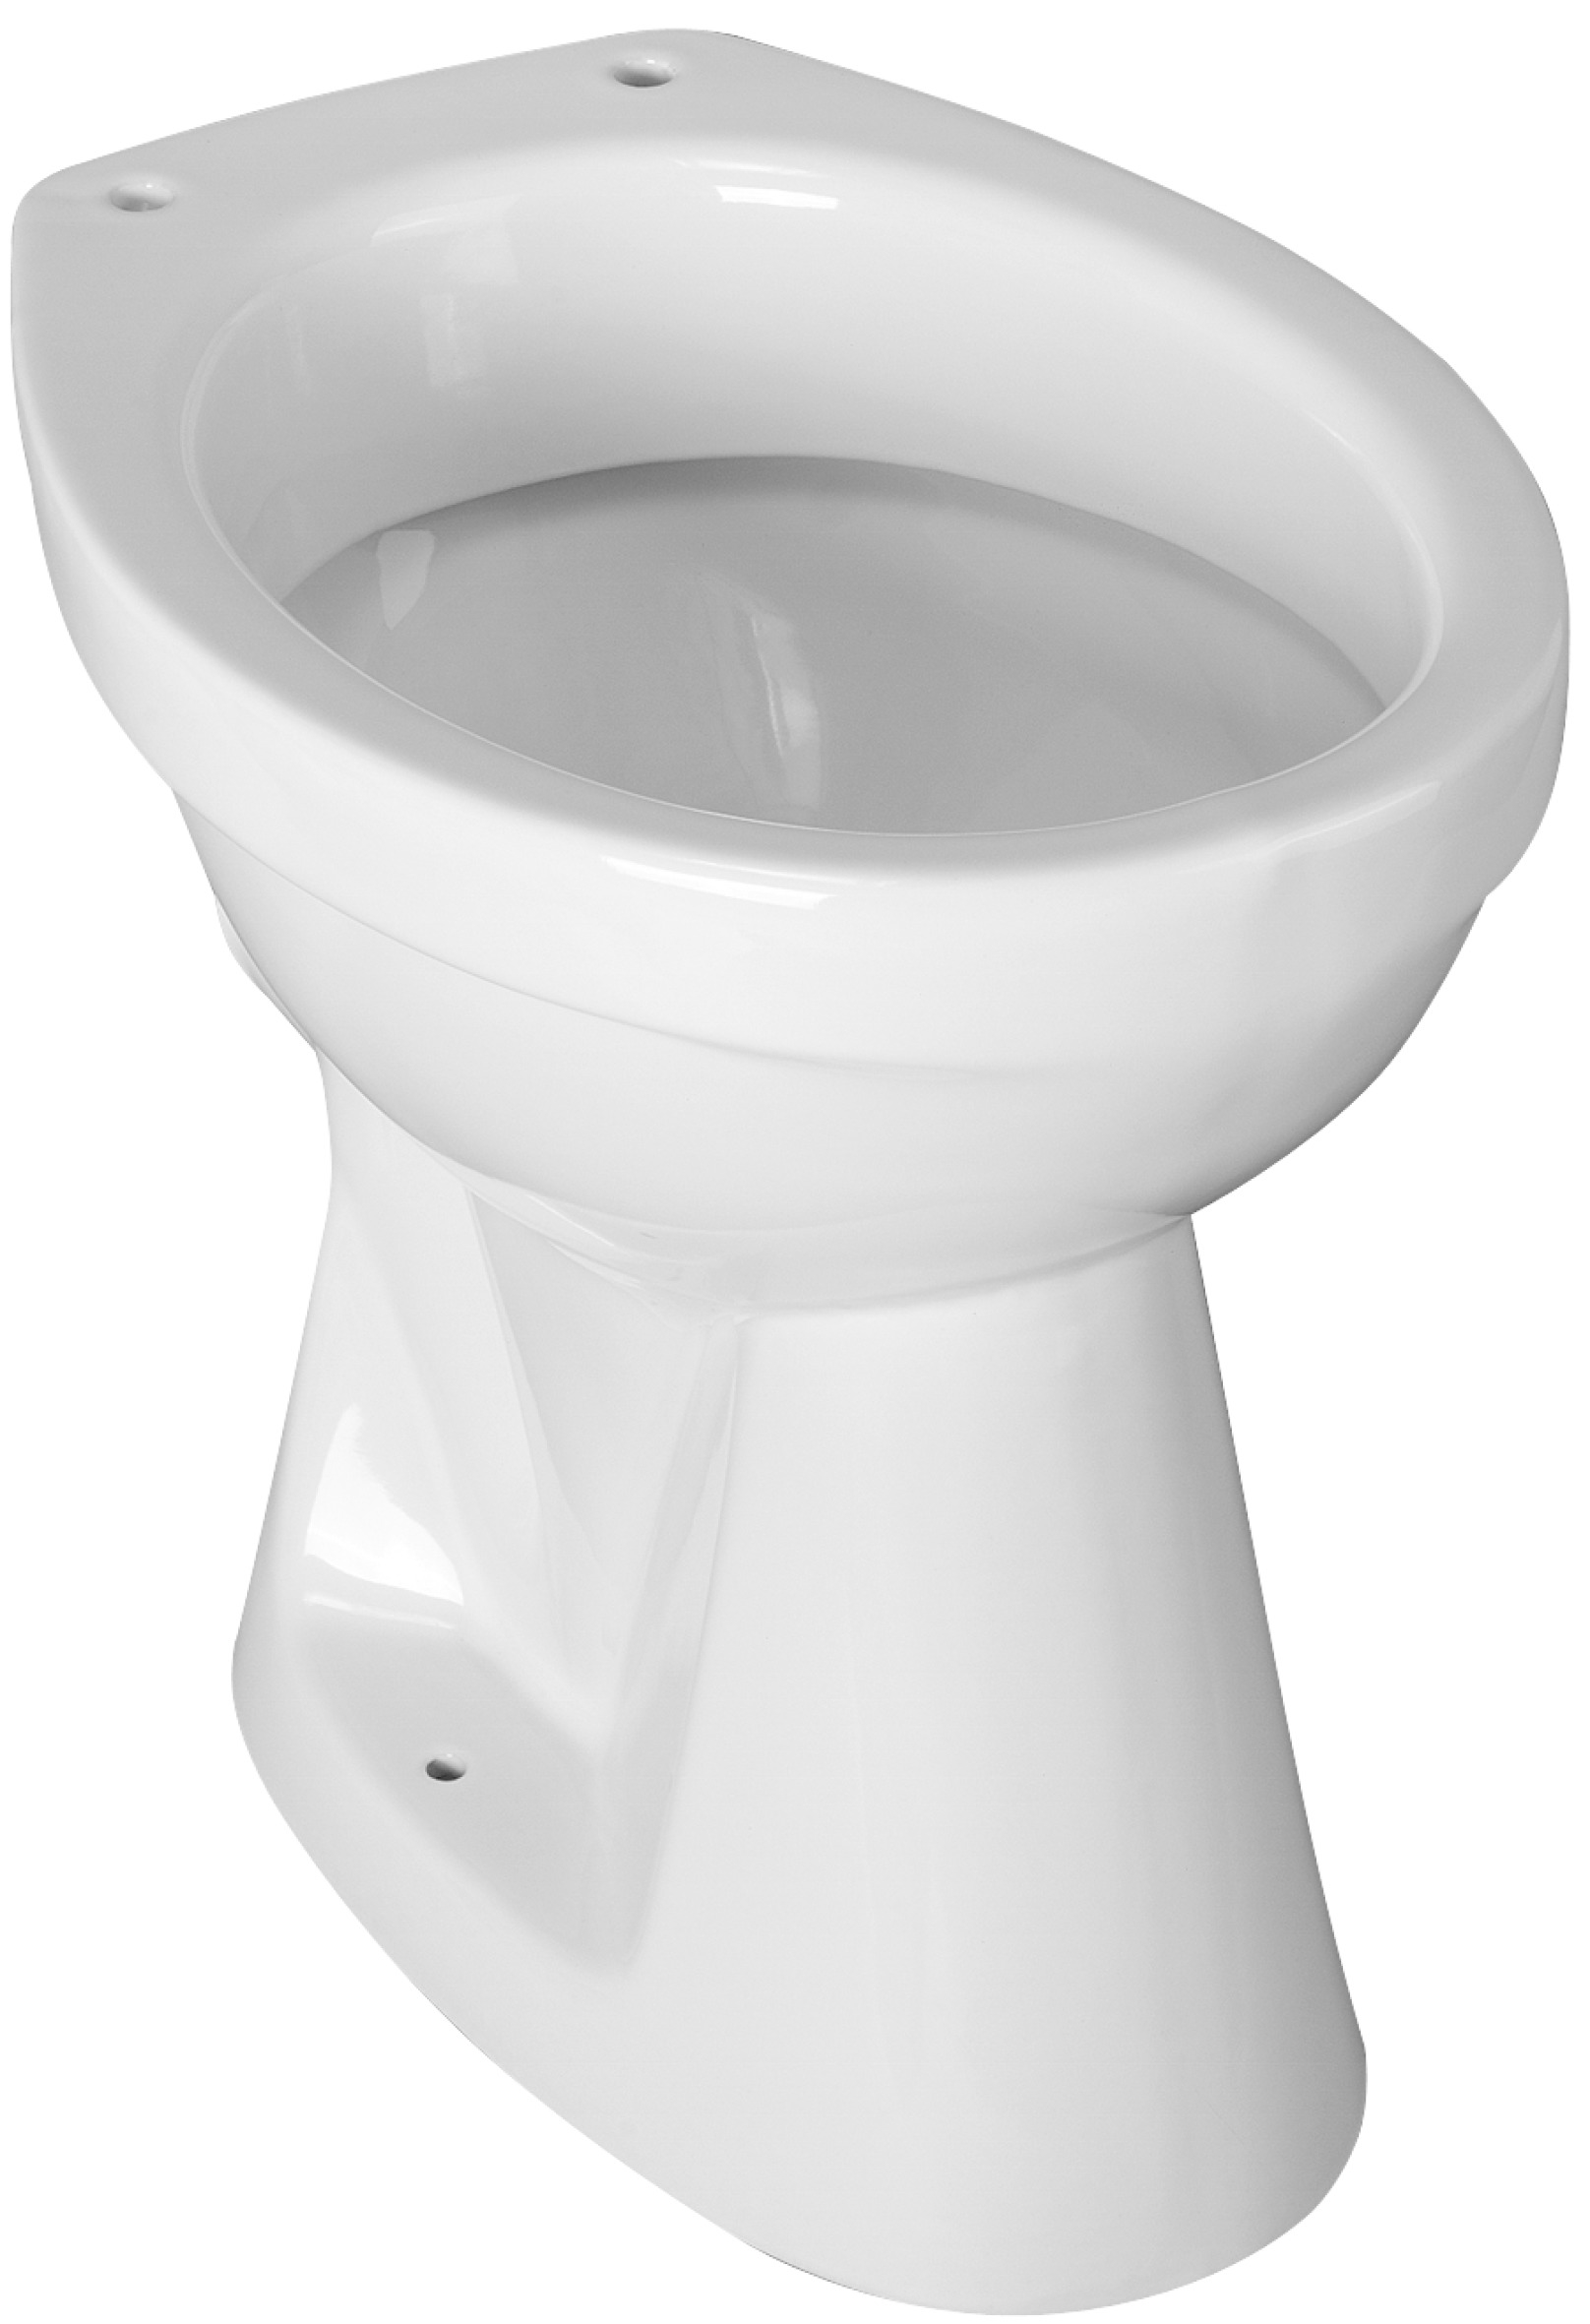 CONMETALL CORNAT Clean WC Höhe 455 tf.weiss 